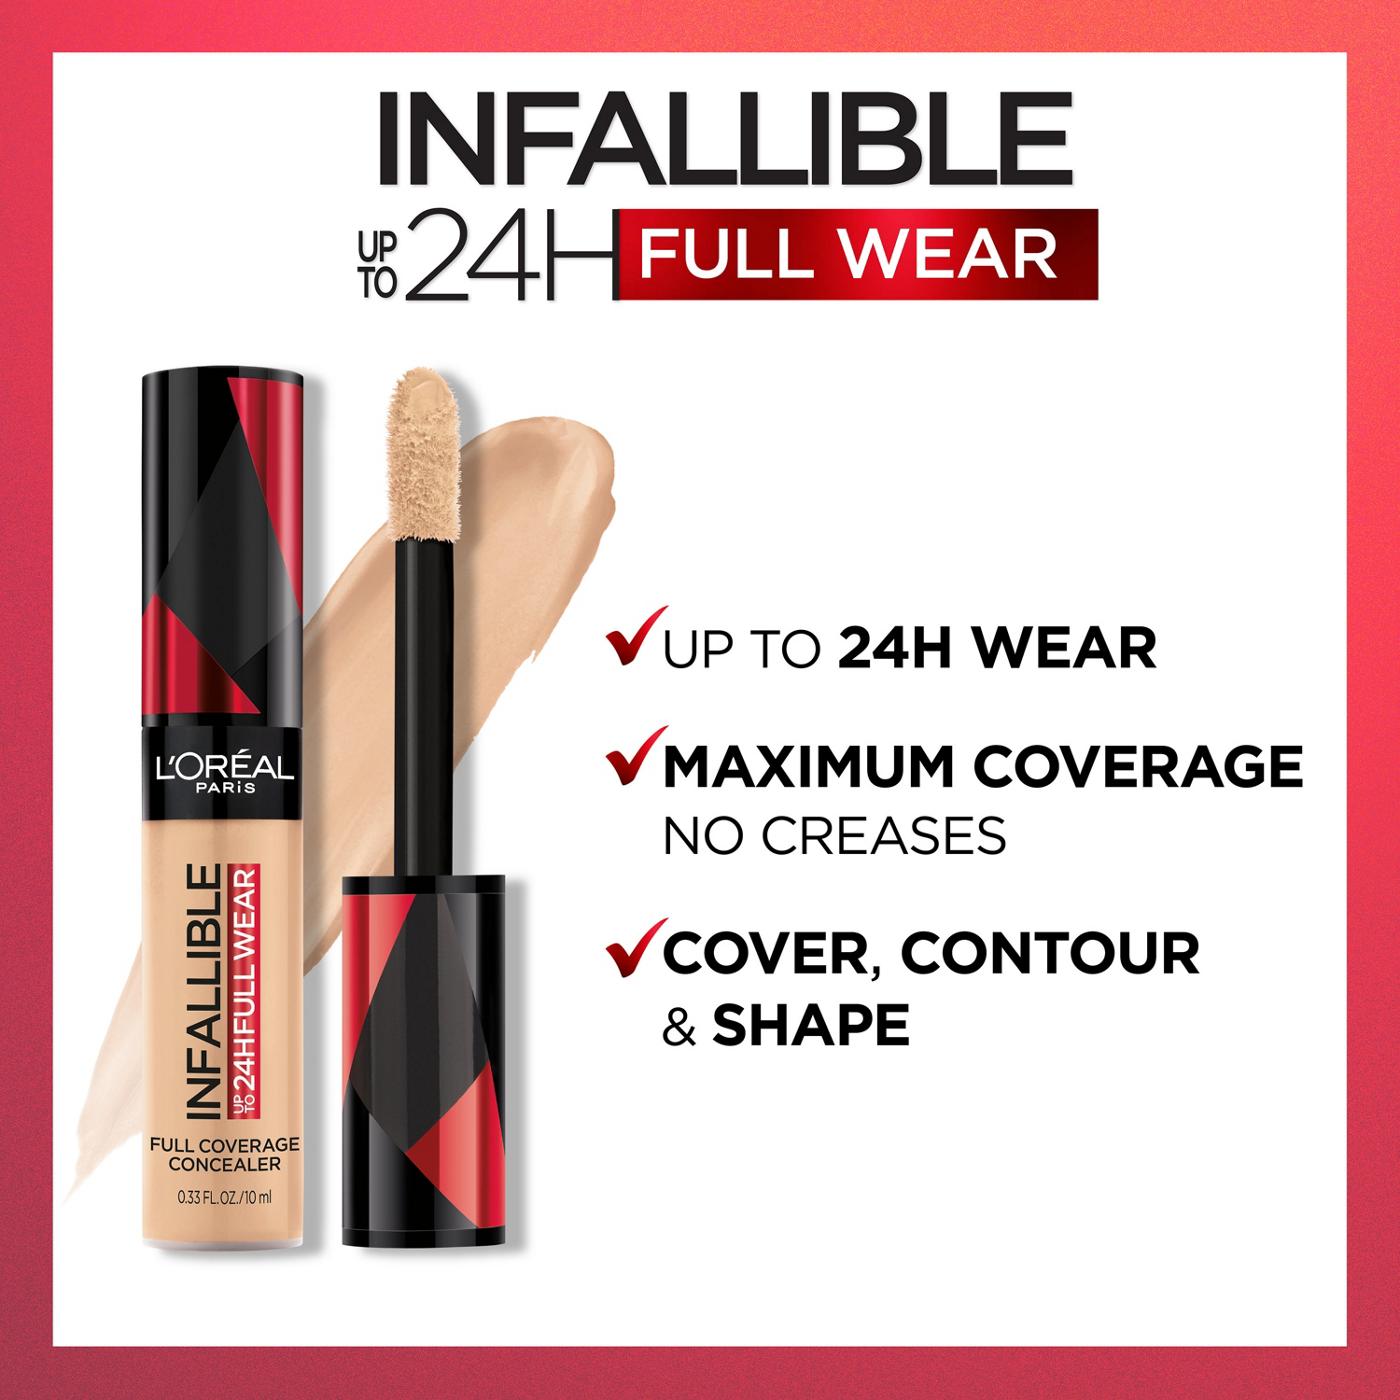 L'Oréal Paris Infallible Full Wear Concealer up to 24H Full Coverage Ivory; image 2 of 7